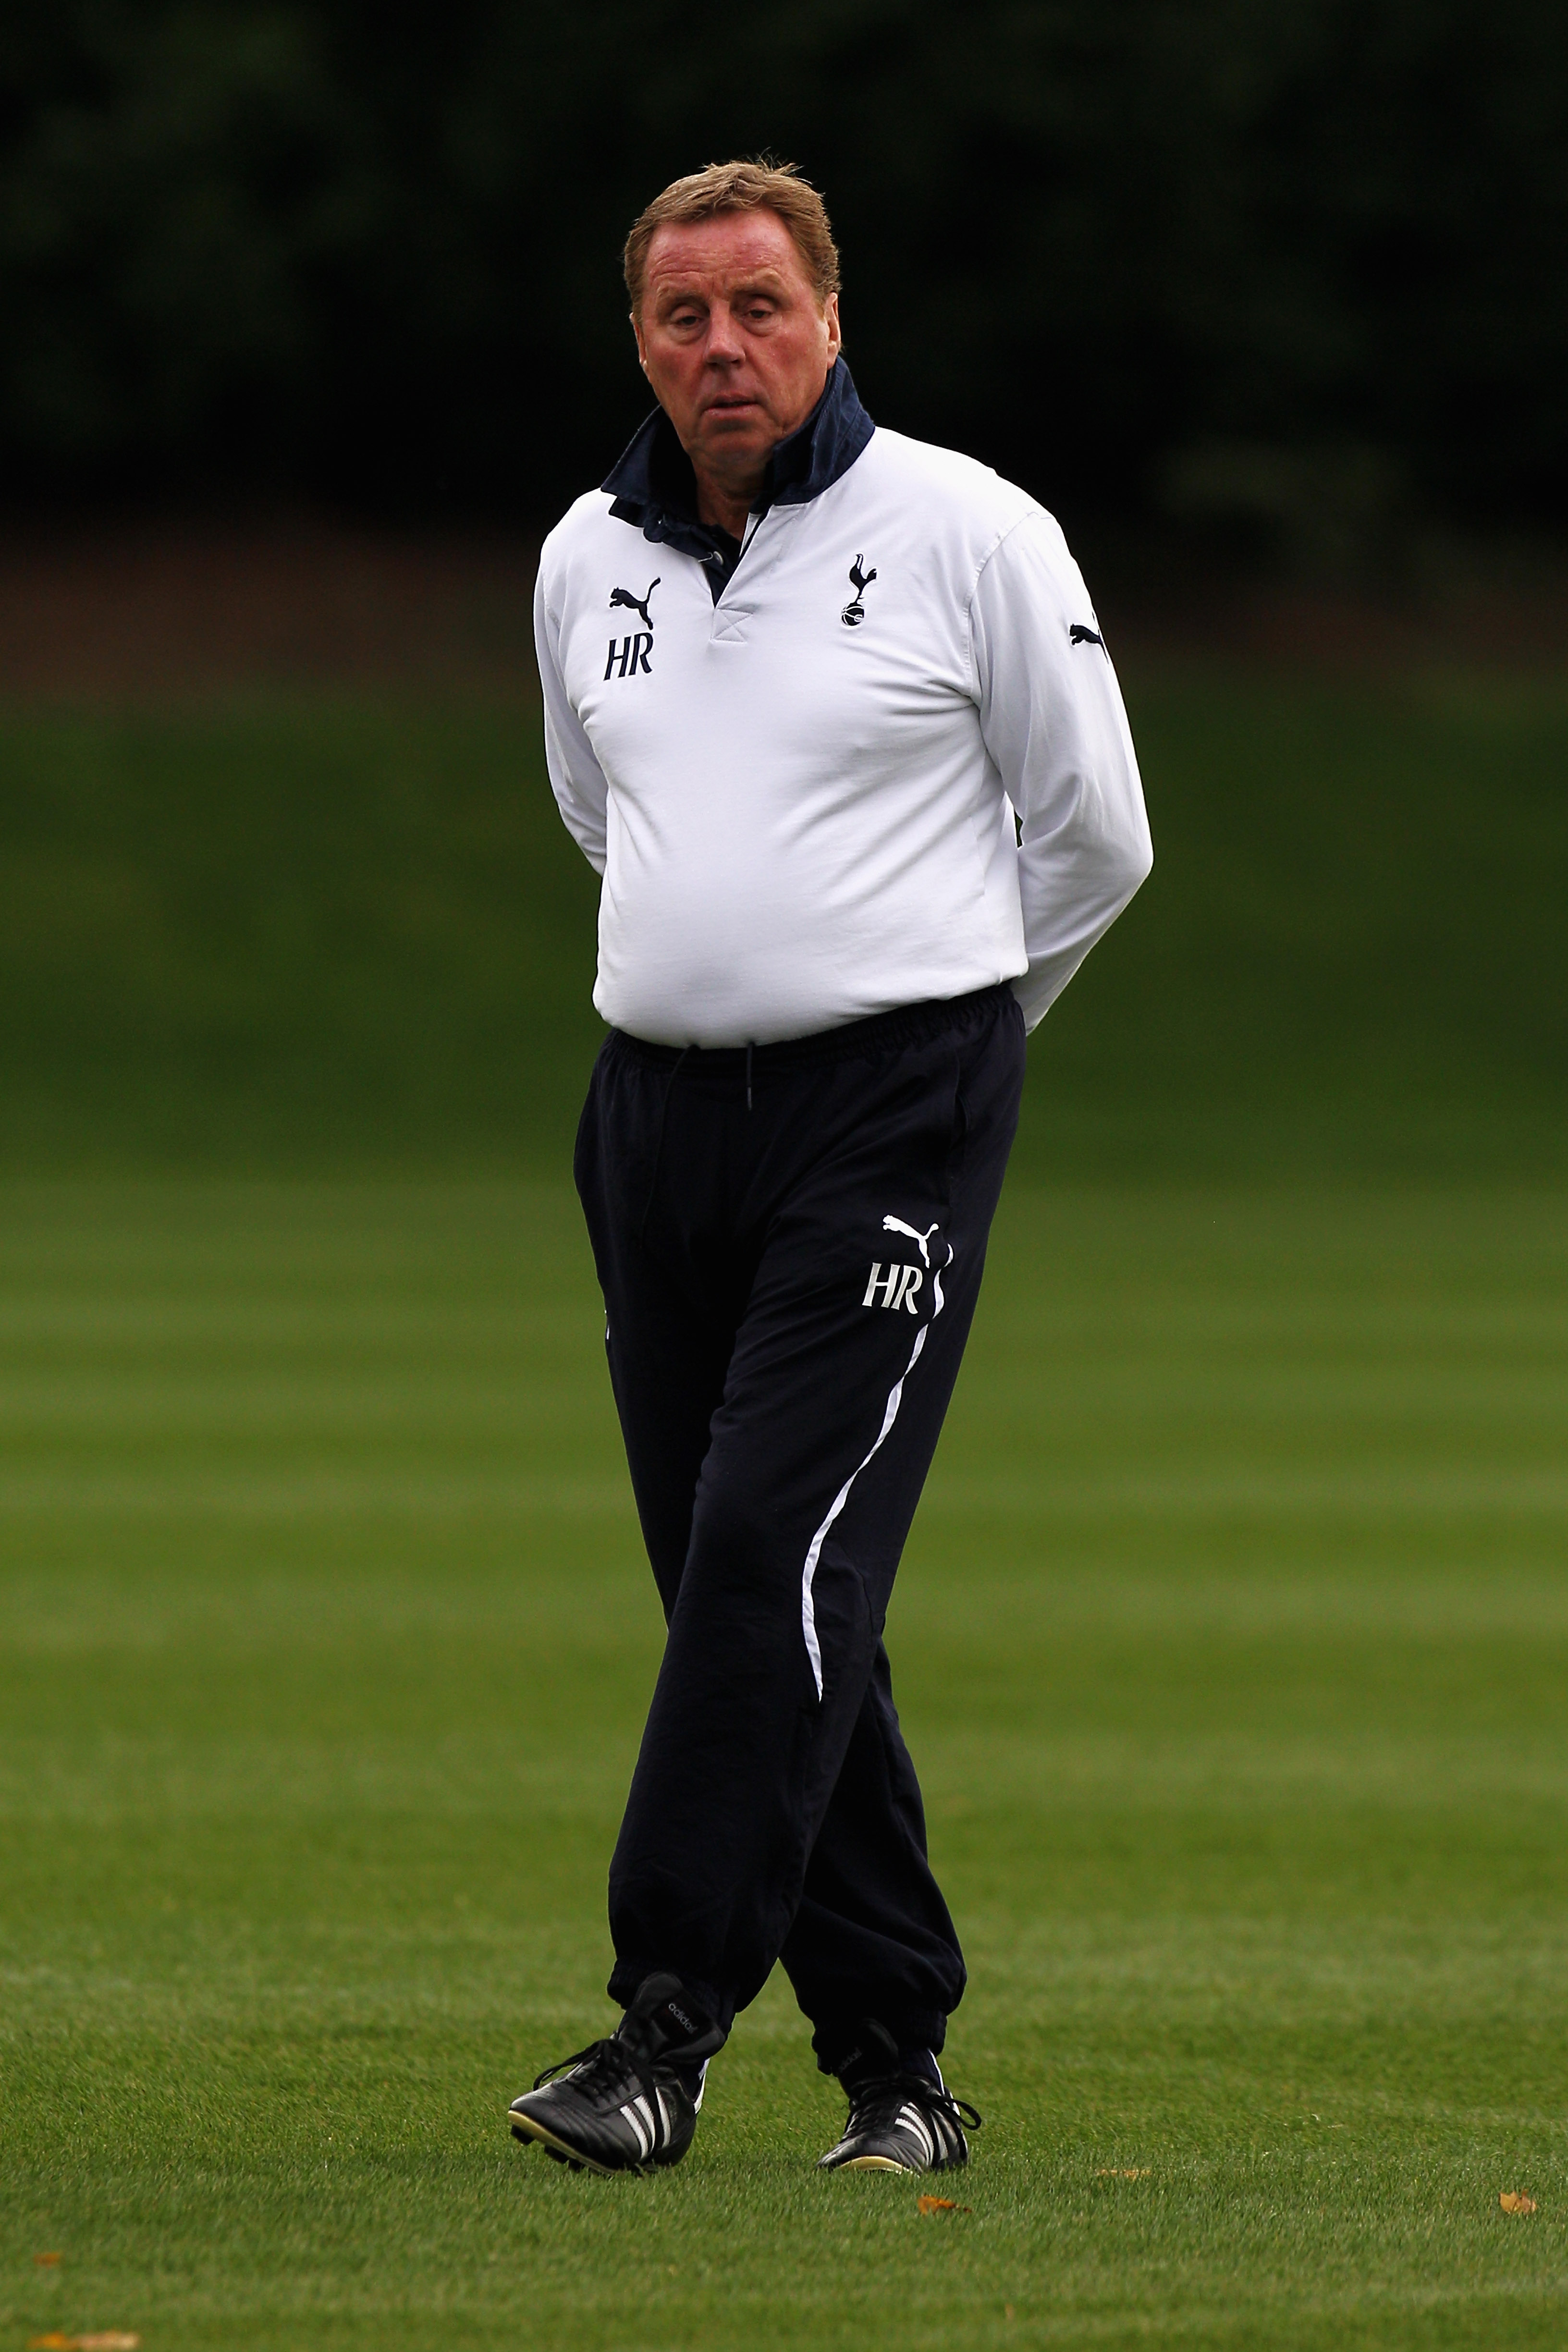 LONDON, ENGLAND - NOVEMBER 01:  Tottenham Manager,  Harry Redknapp looks on during the Tottenham Hotspur training session ahead of their UEFA Champions League group stage match against Inter Milan at Tottenham Hotspur Training Ground on November 1, 2010 i